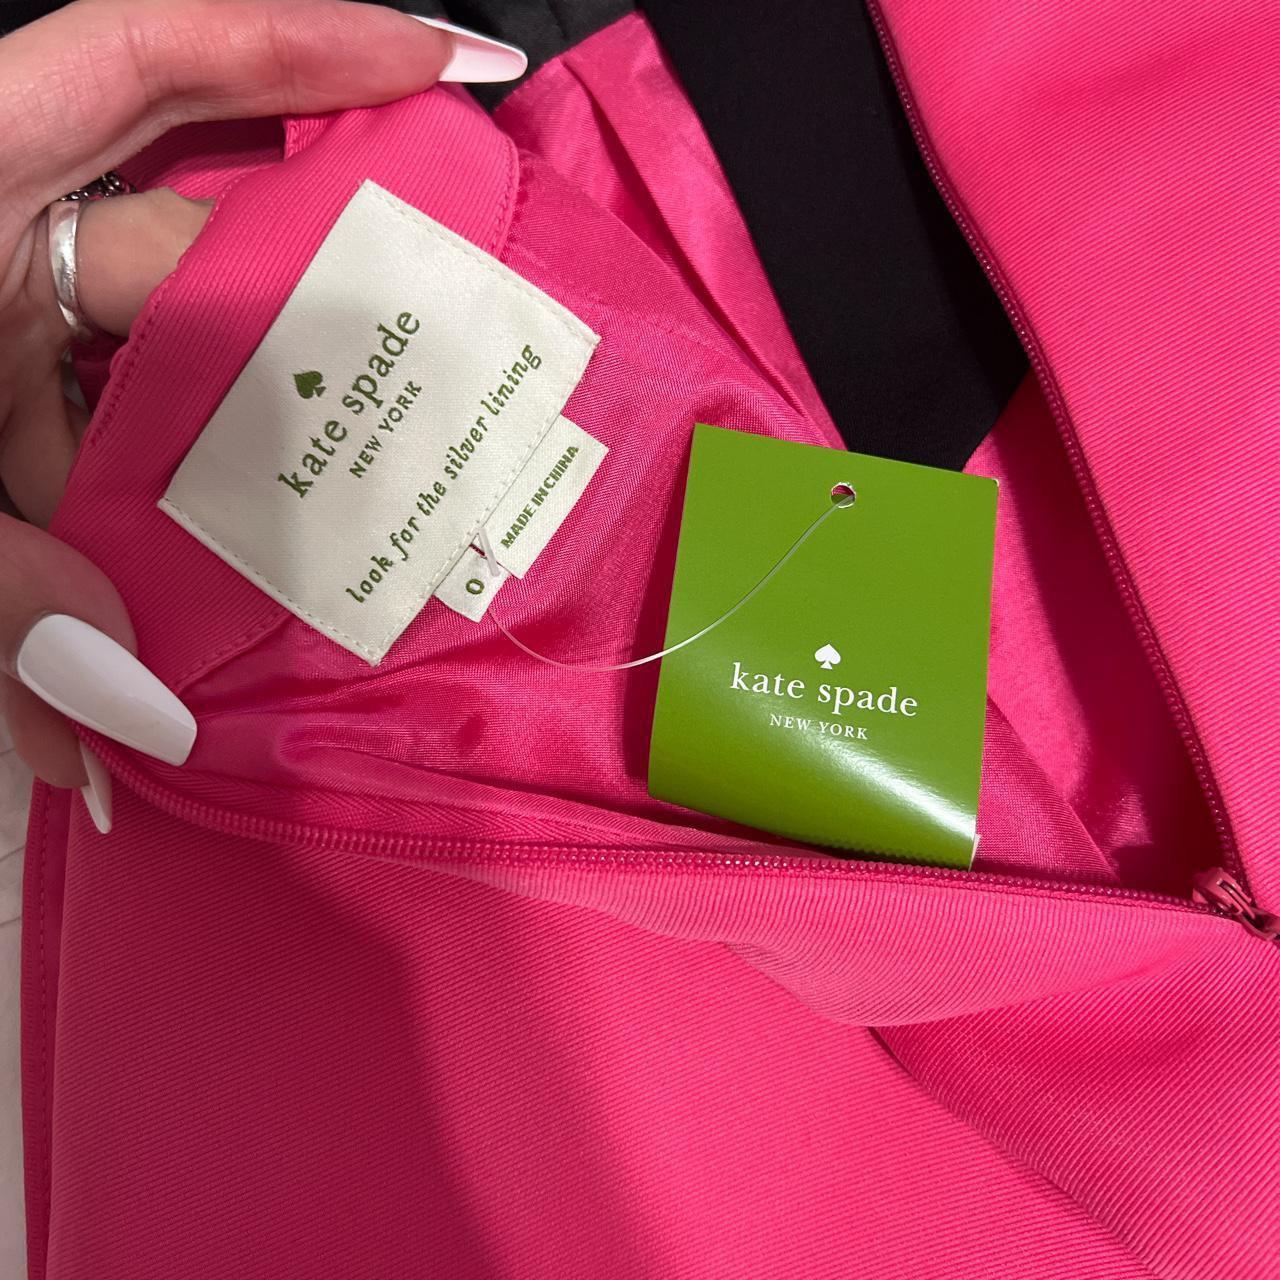 pink kate spade dress with bow on the back, size 0 - Depop